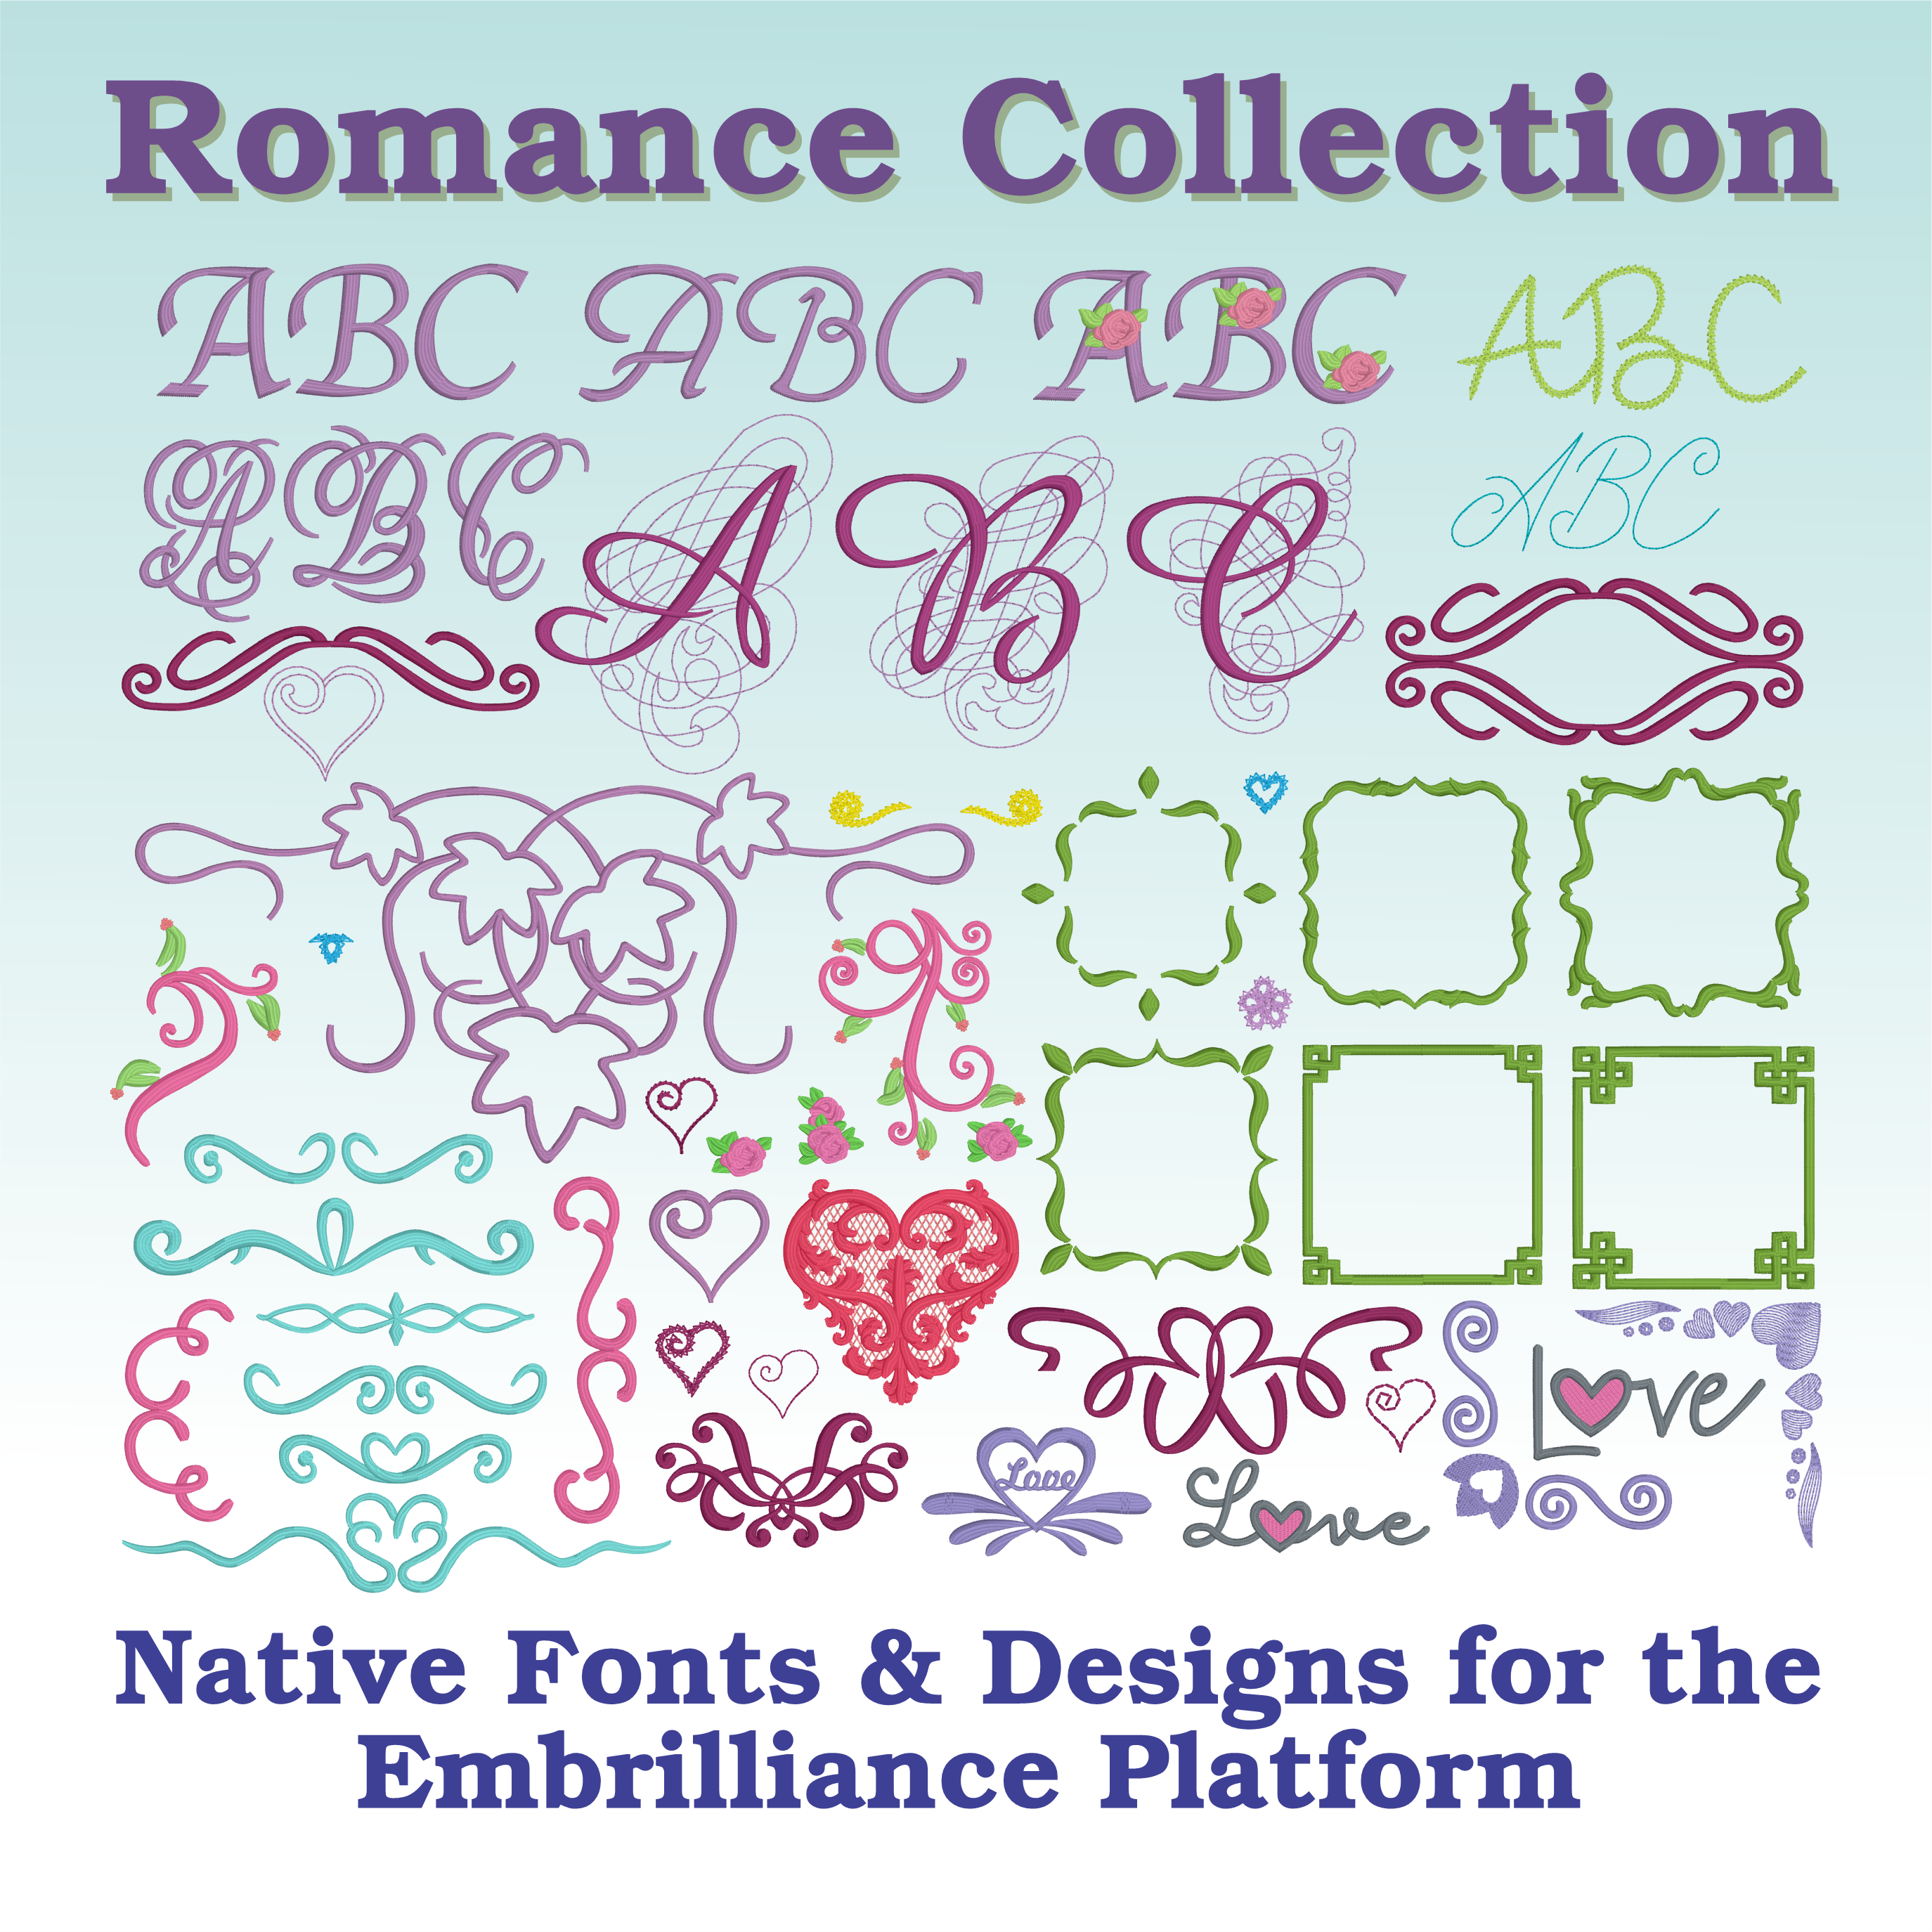 Embrilliance Embroidery Software Romance Collection 1 - Romantic Embroidery Designs Collection